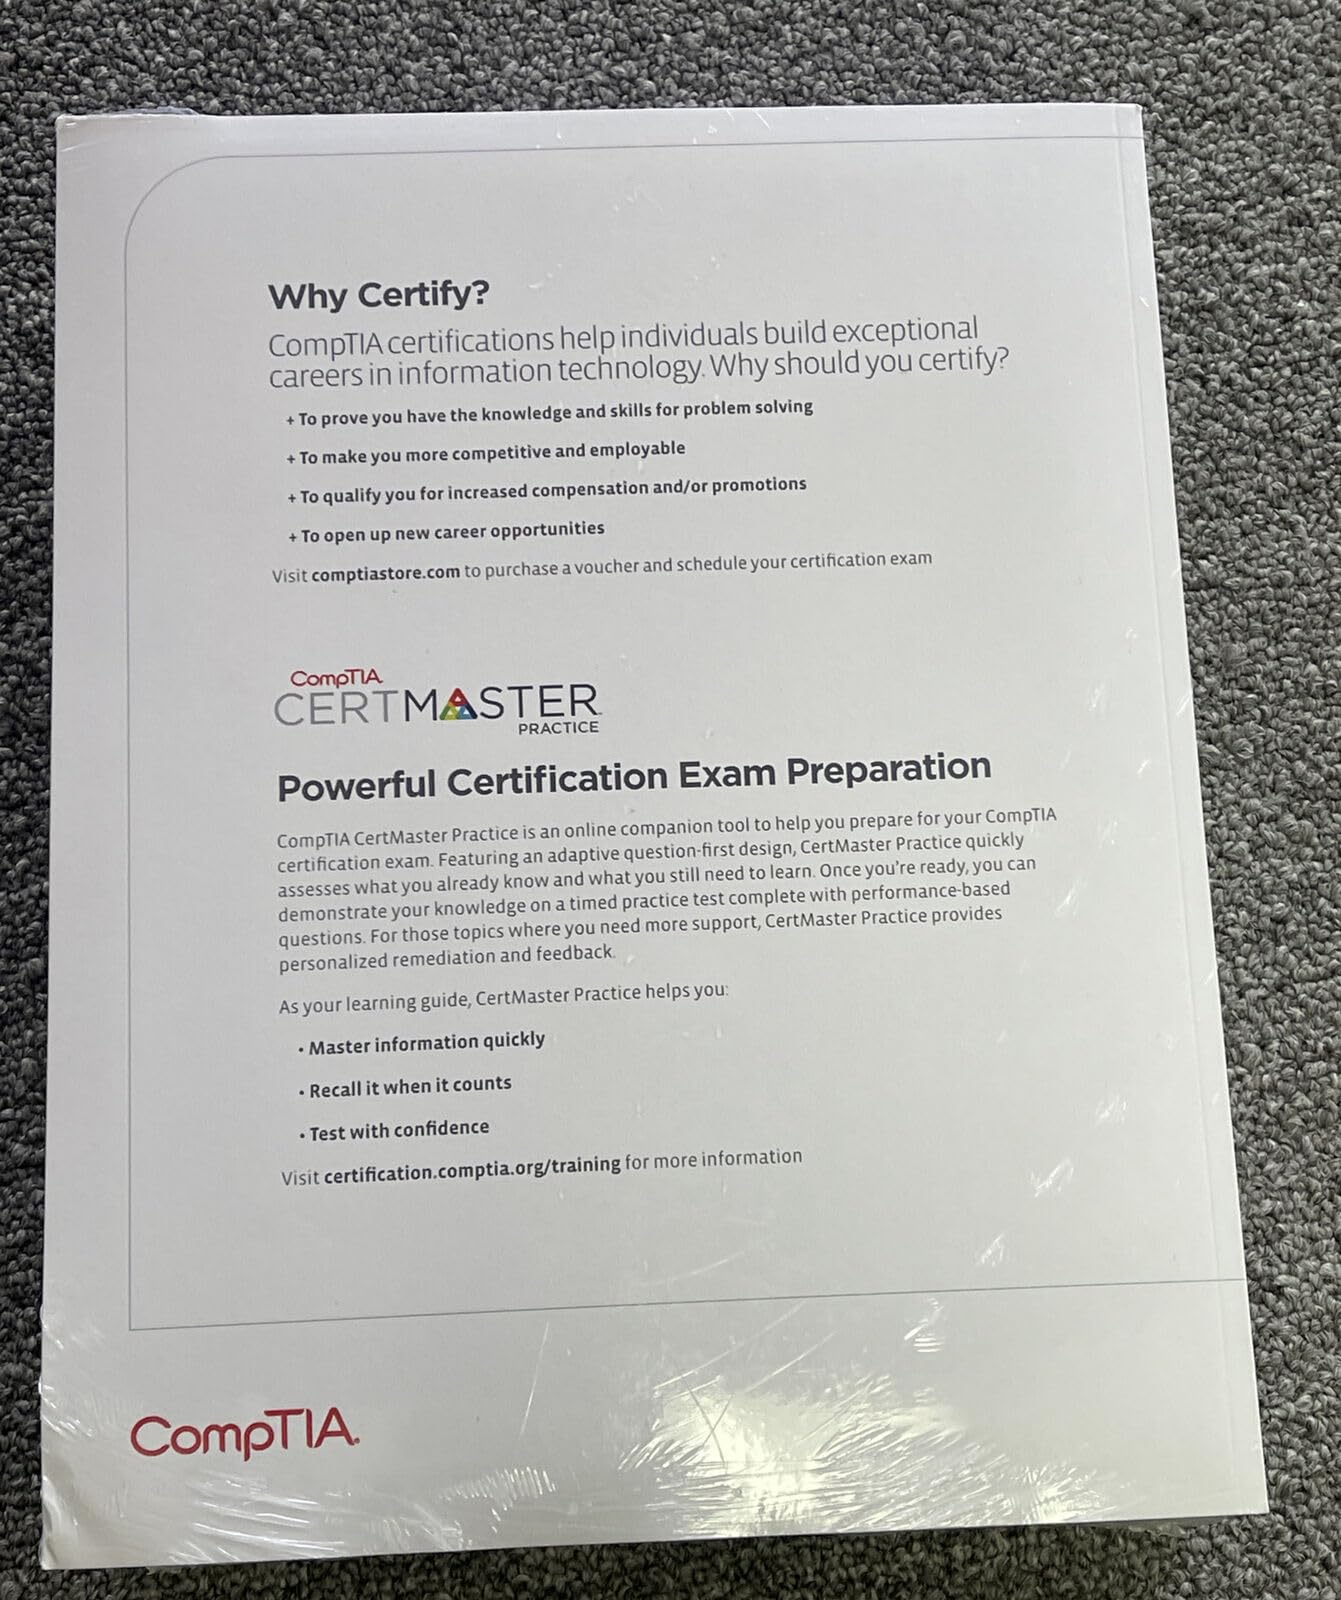 CompTIA A+ Complete Study Guide: Exam Core 1 220-1001 and Exam Core 2 220-1002